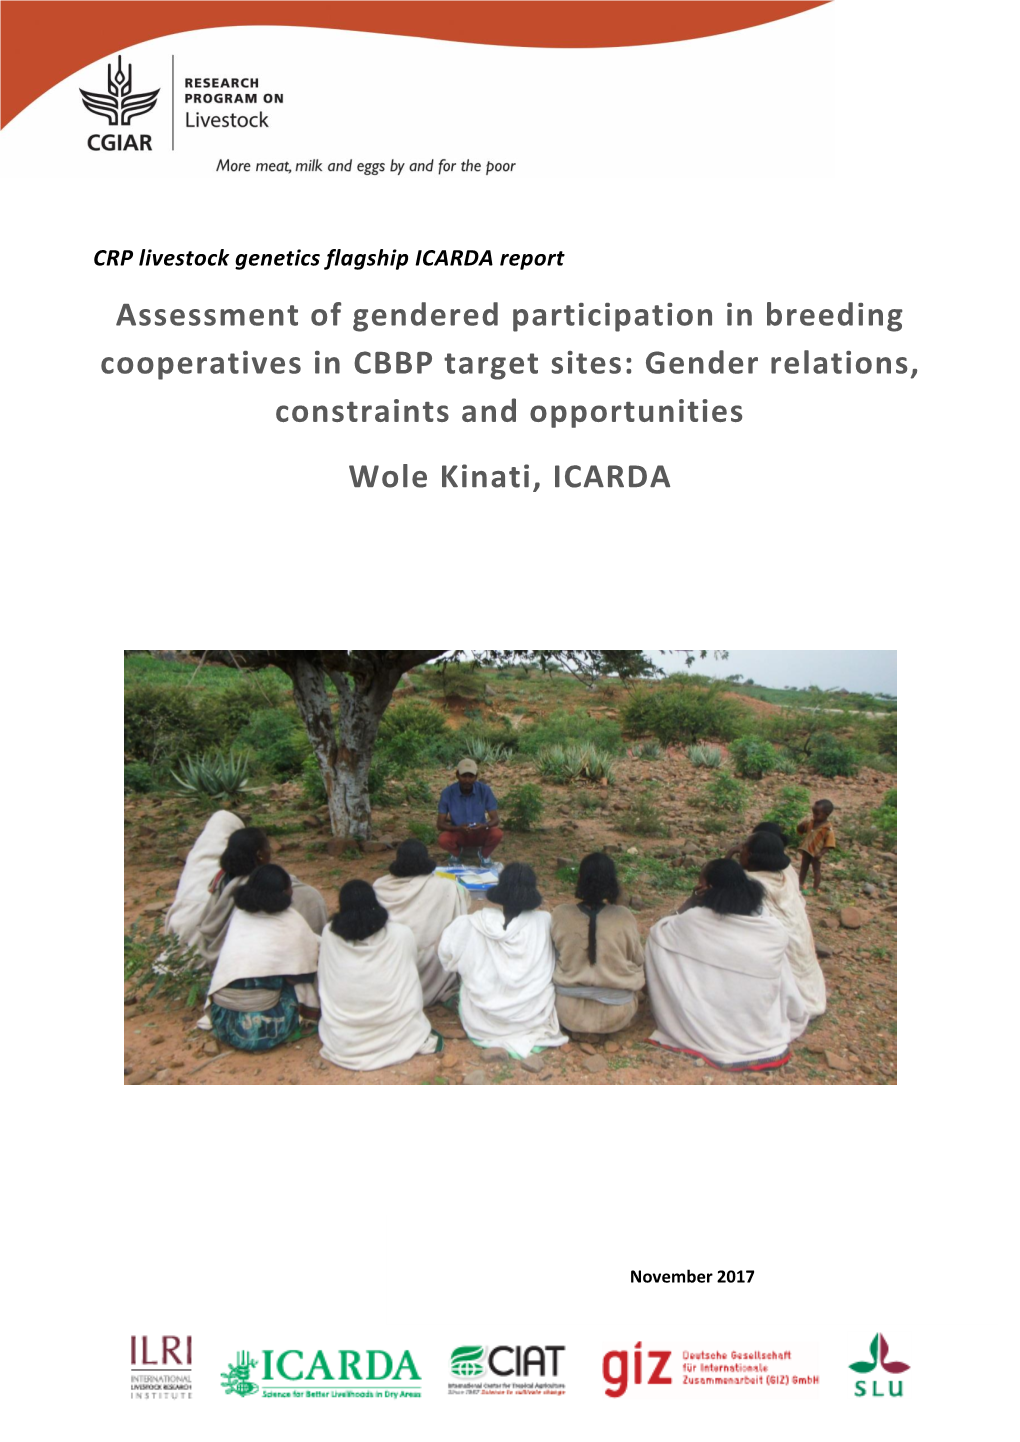 Assessment of Gendered Participation in Breeding Cooperatives in CBBP Target Sites: Gender Relations, Constraints and Opportunities Wole Kinati, ICARDA